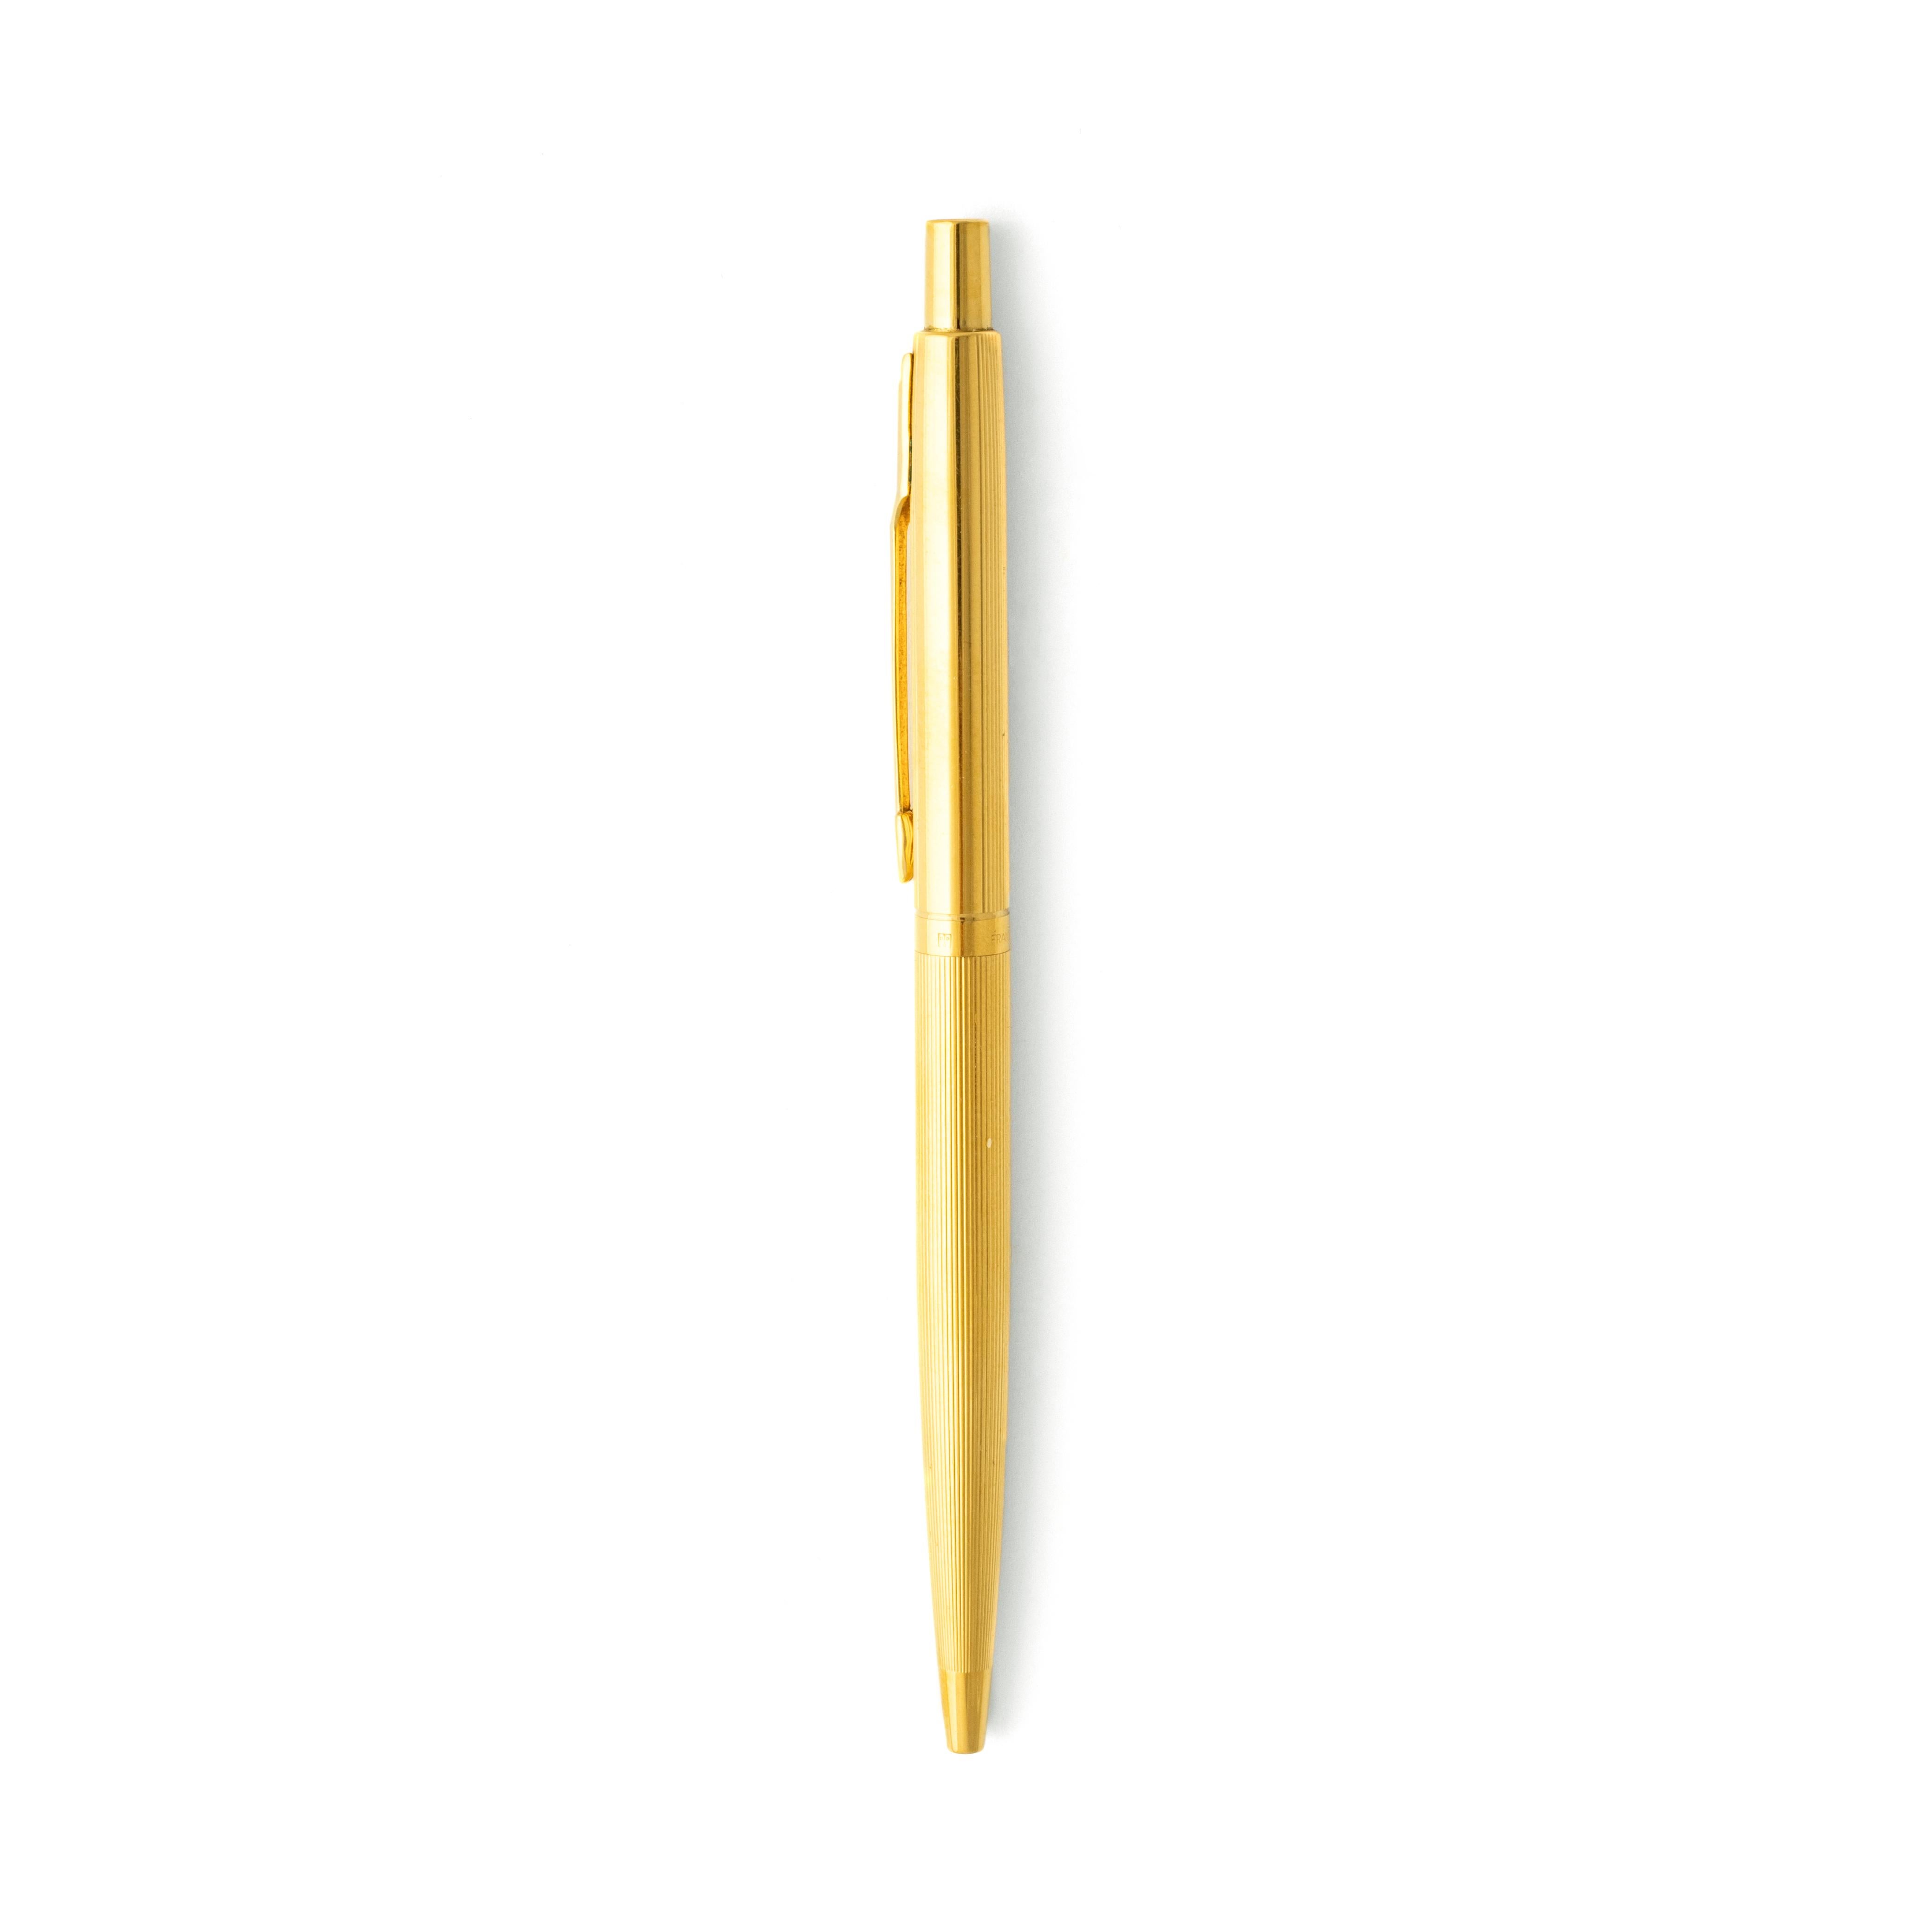 Parker Gold plated BallPoint Pen.
Collection 45 Flighter. 
Dimensions: 13.20 x 0.75 centimeters.

Sold as is. We do not guarantee the proper functioning of this pen.